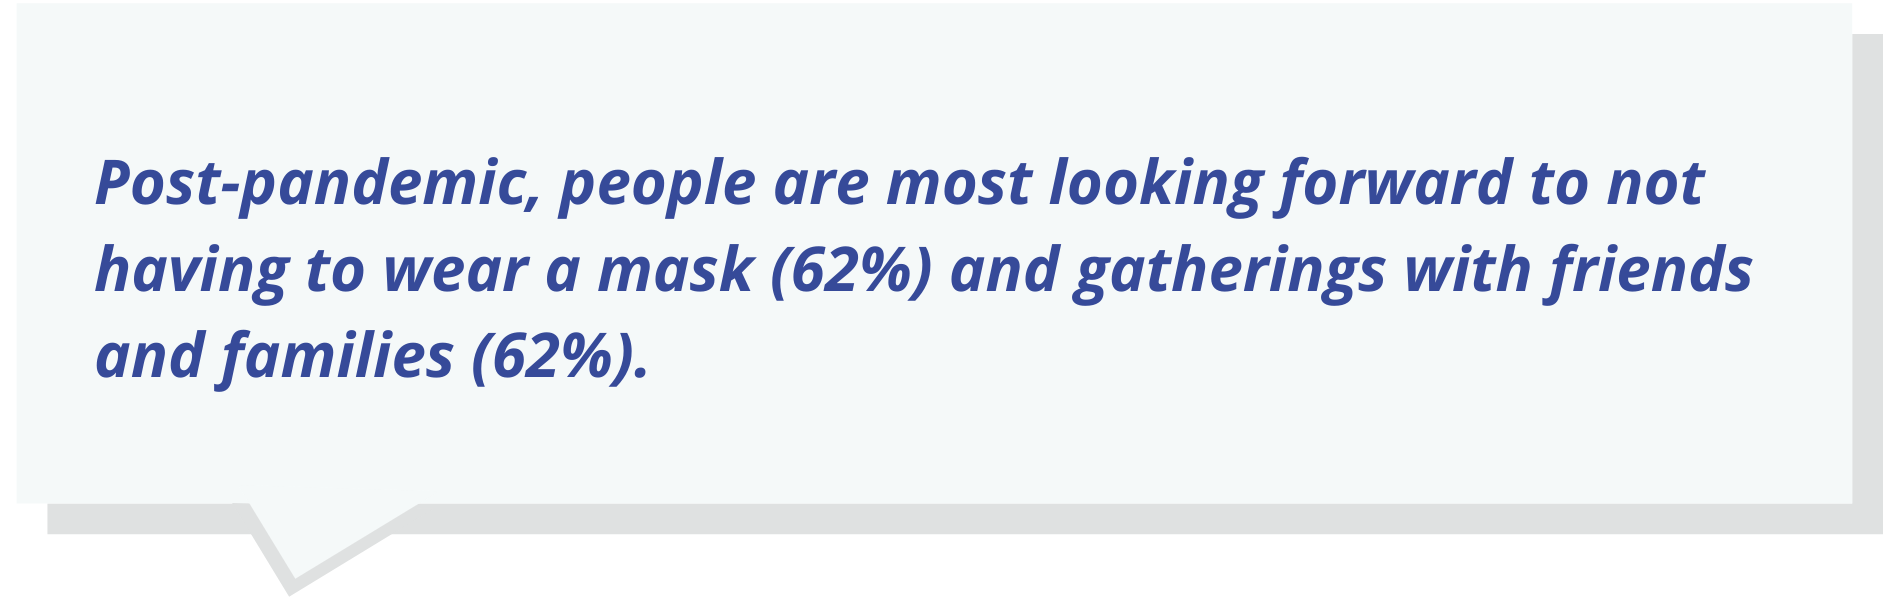 Quote Text #4_ Post-pandemic, people are most looking forward to not having to wear a mask (62%) and gatherings with friends and families (62%).